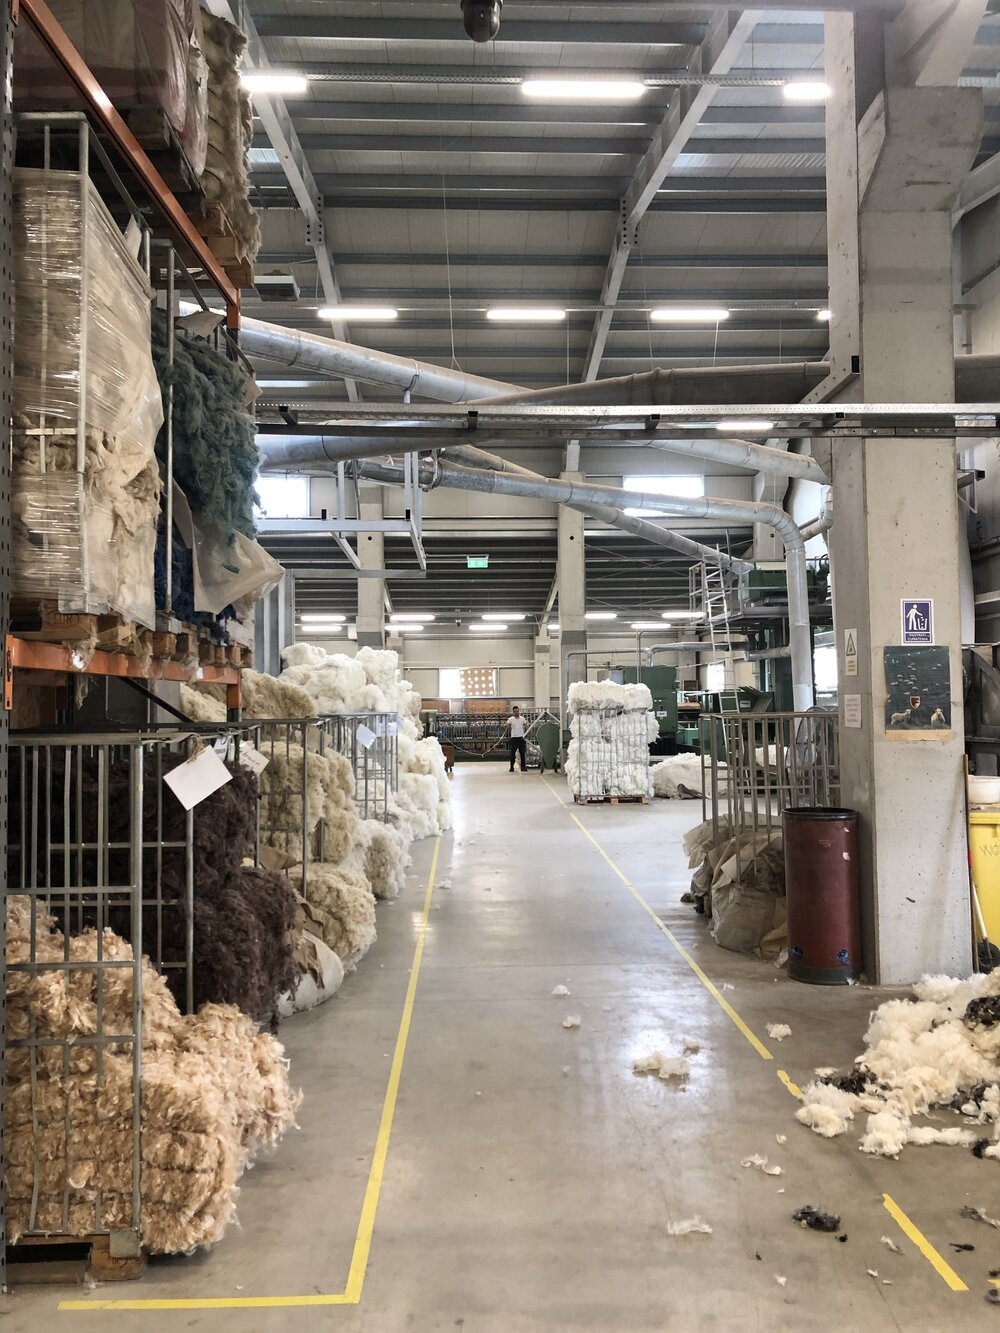 Where the wool is cleaned and prepared